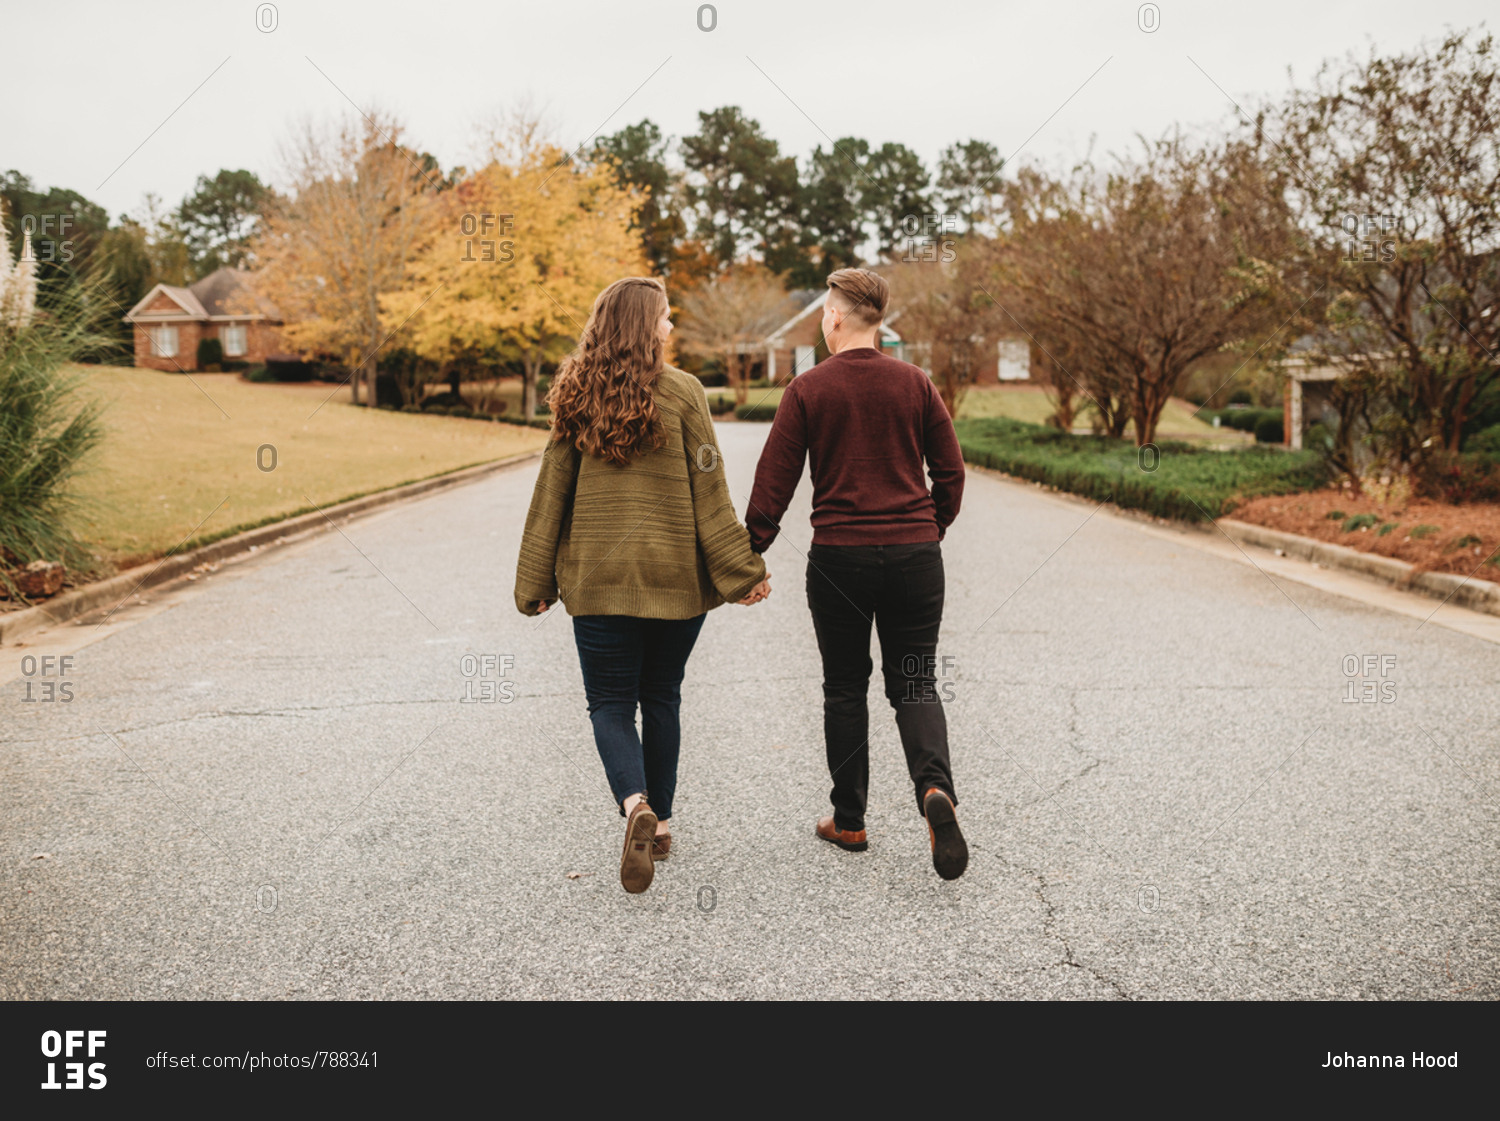 two people walking away holding hands